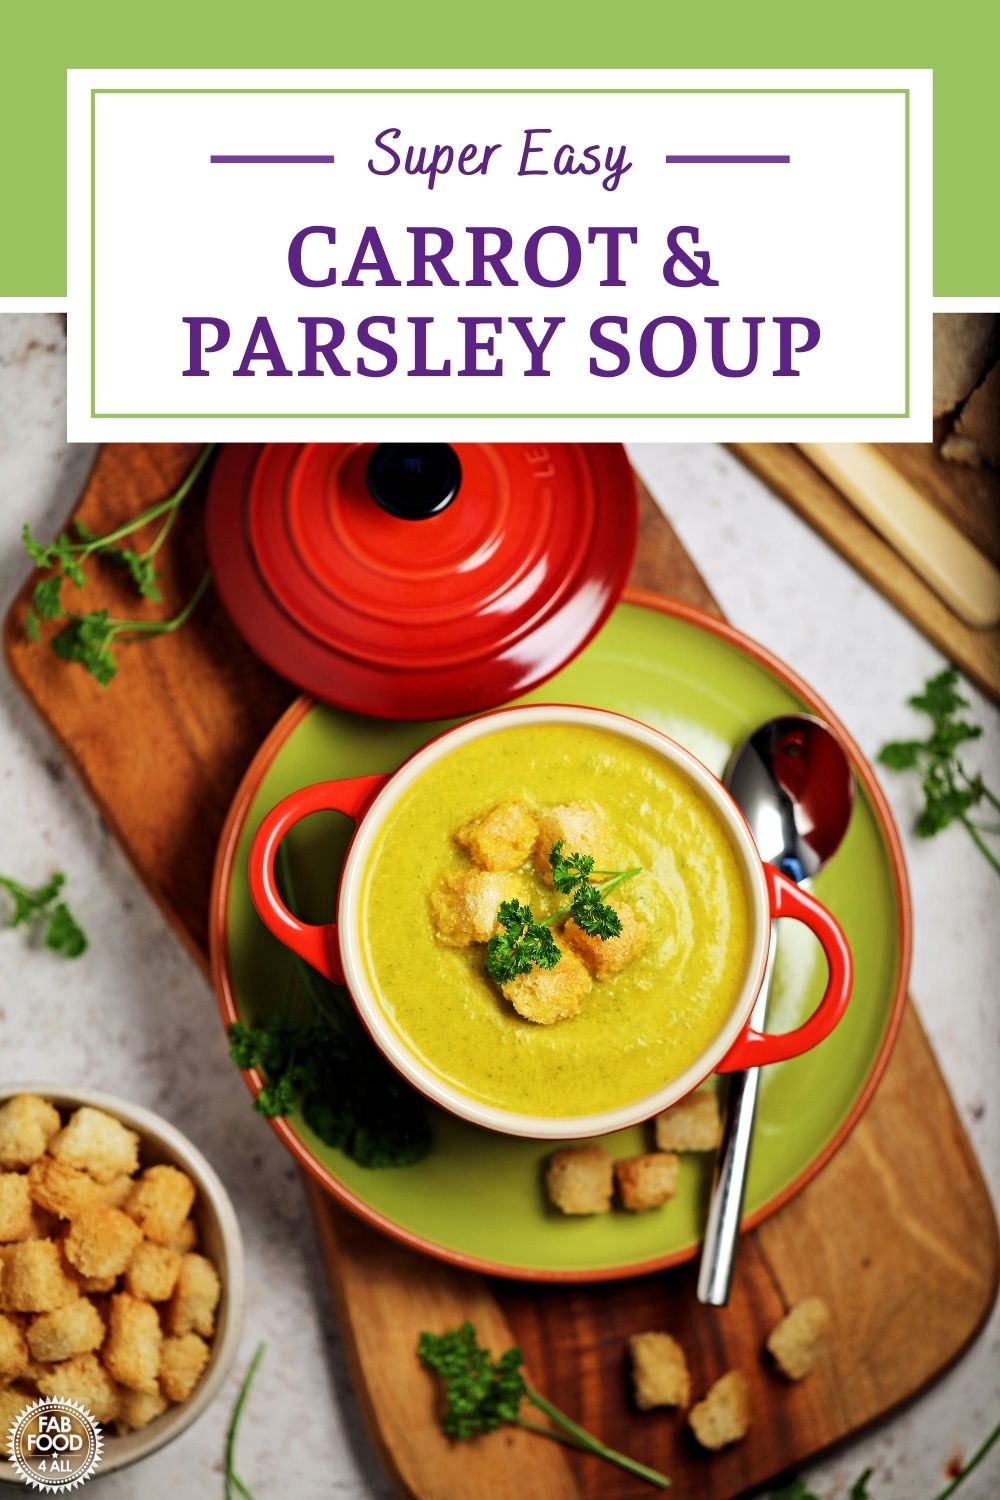 Carrot and Parsley Soup - nutritious & delicious! Fab Food 4 All